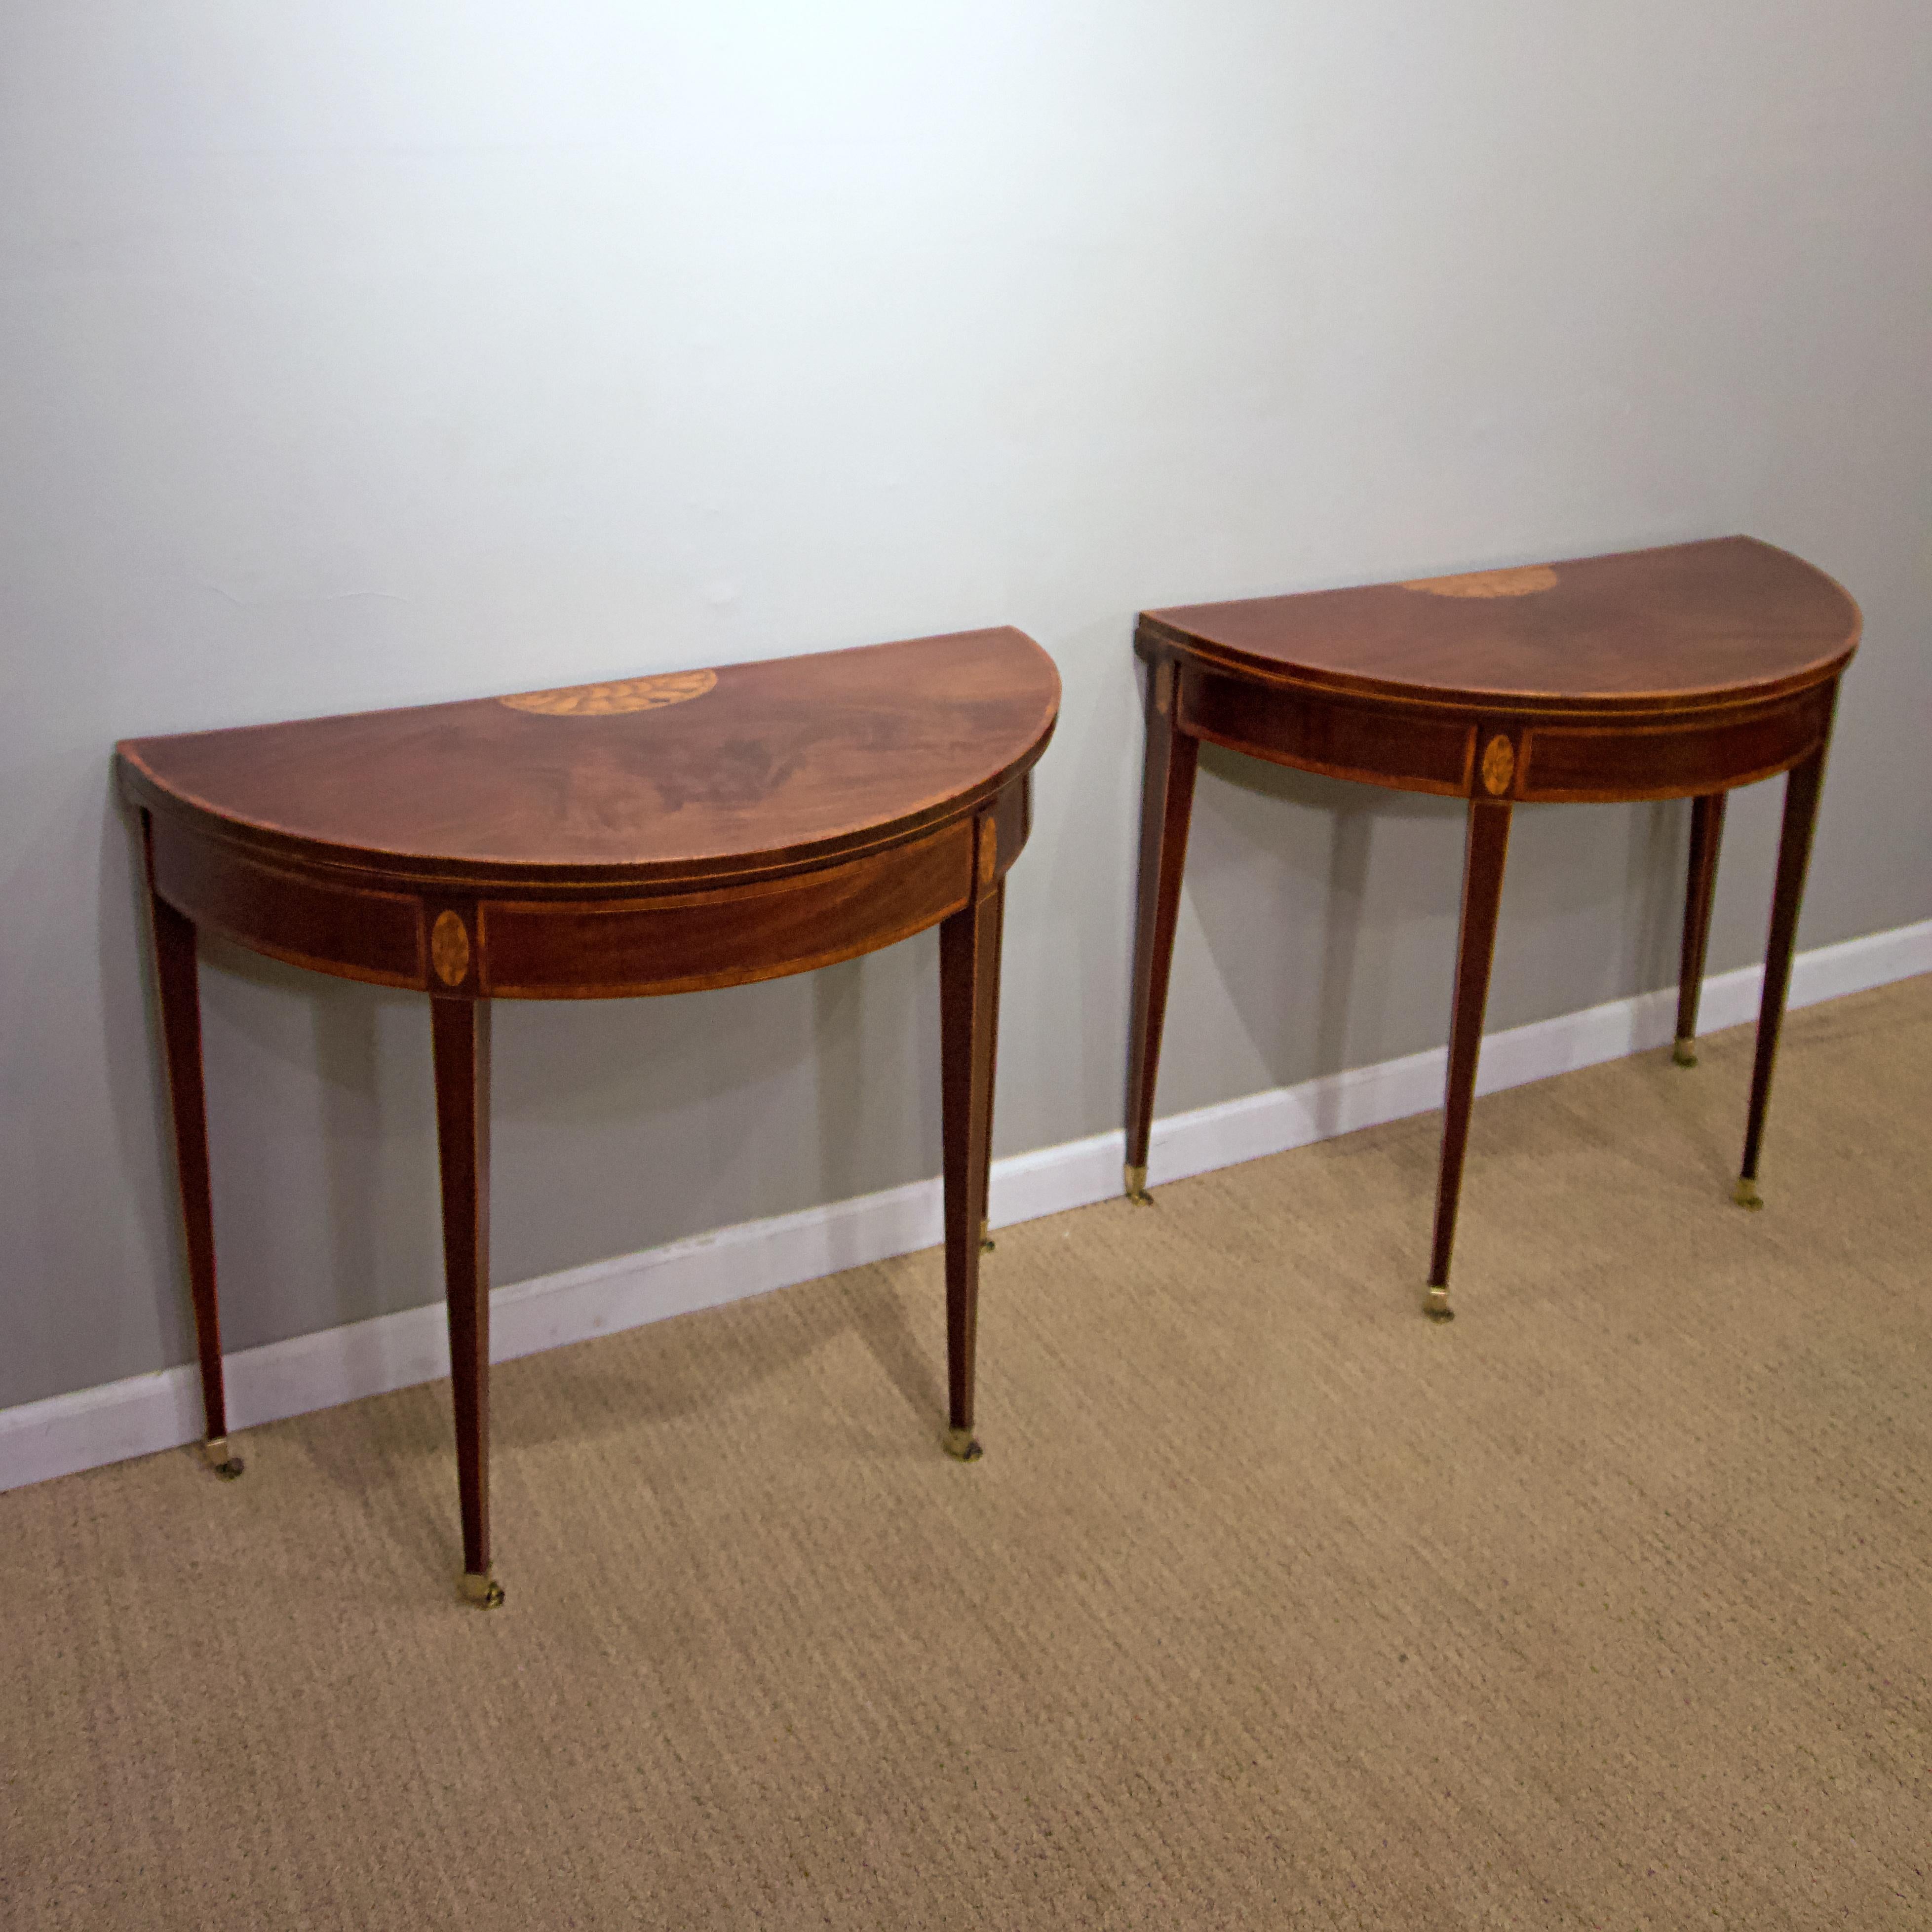 Polished Pair of George III Mahogany and Boxwood and Satinwood Demilune Card Tables